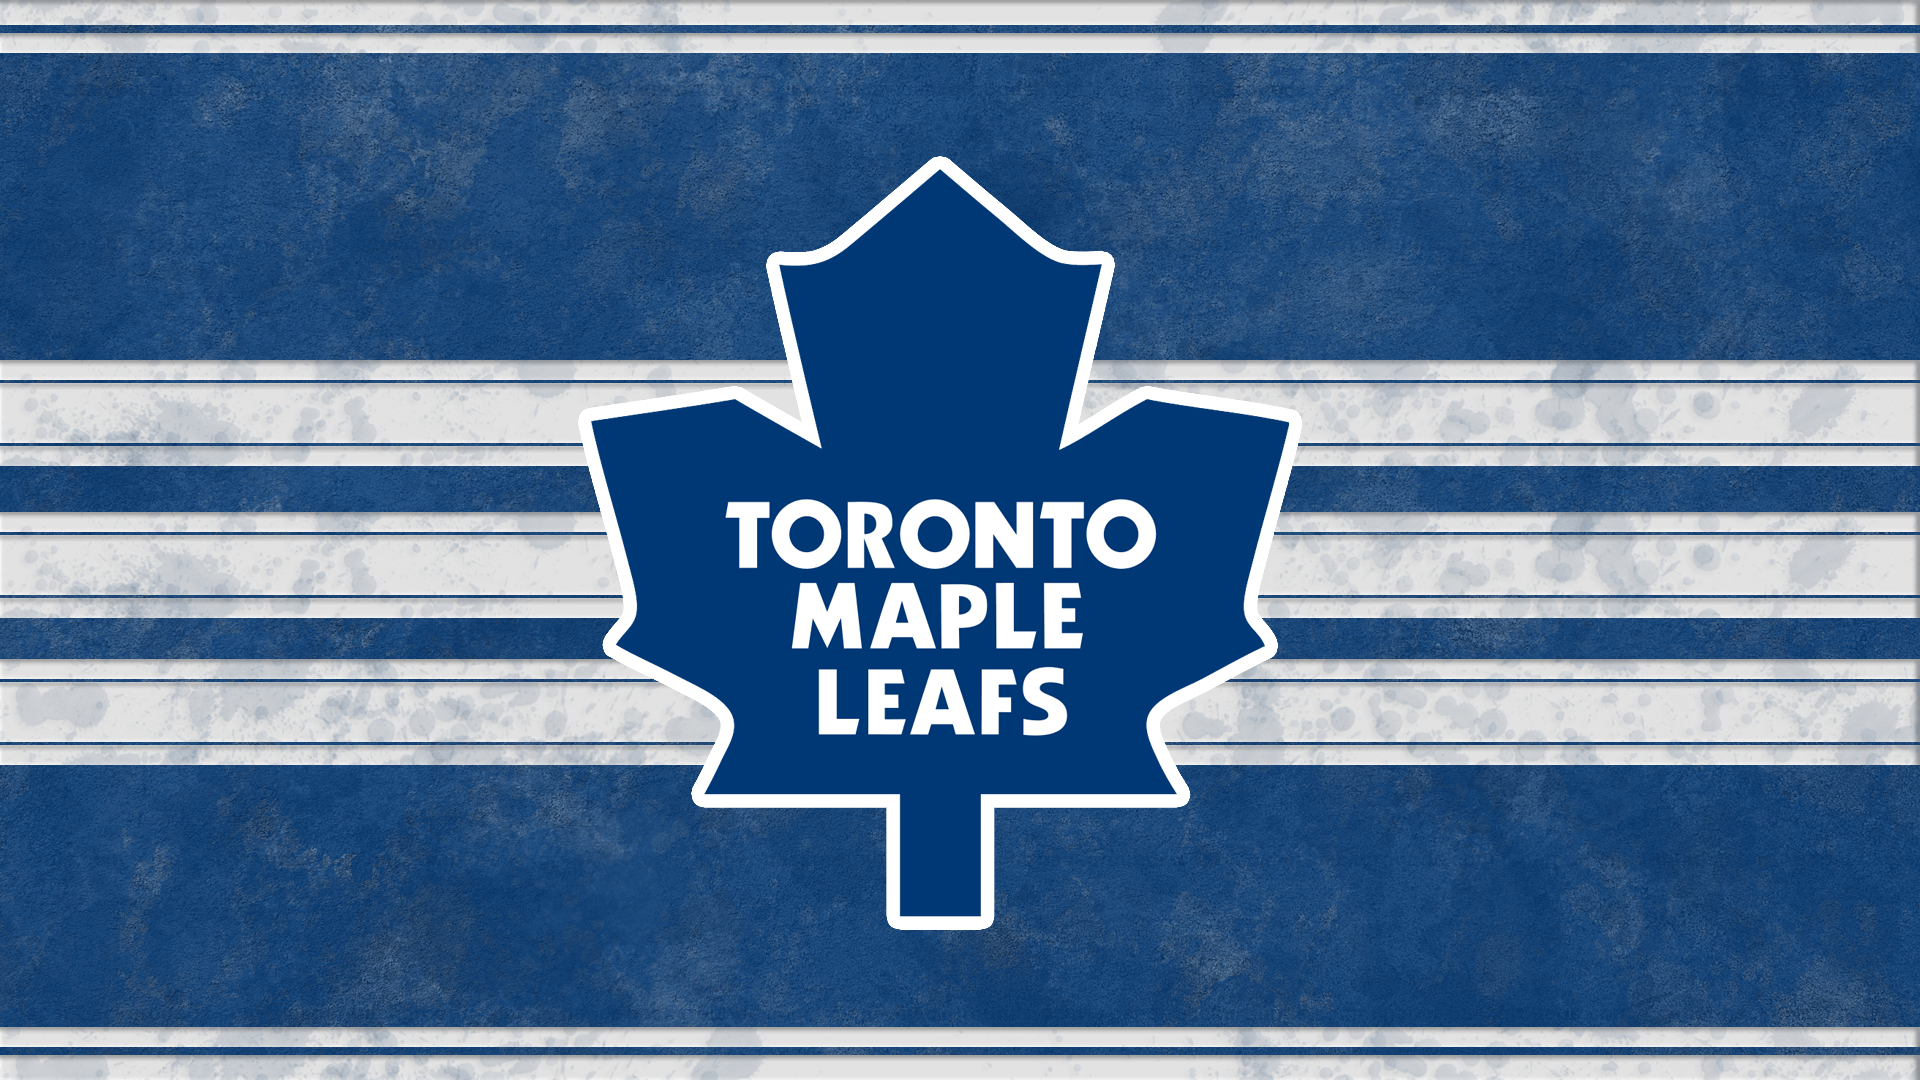 Toronto Maple Leafs 2017 Wallpapers Wallpaper Cave